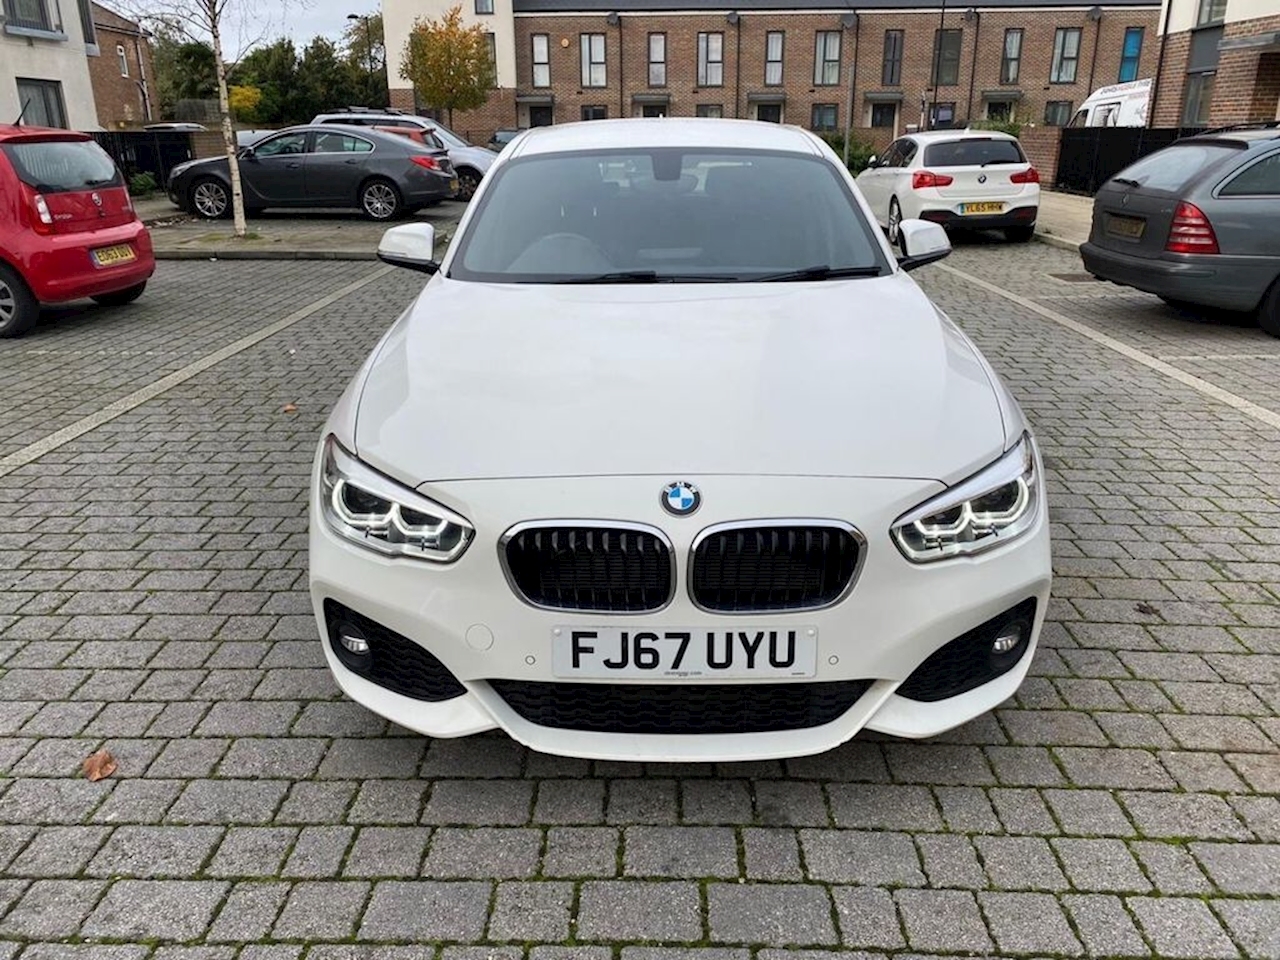 BMW 1 Series 116d Sport for sale in Co. Westmeath for €31,995 on DoneDeal